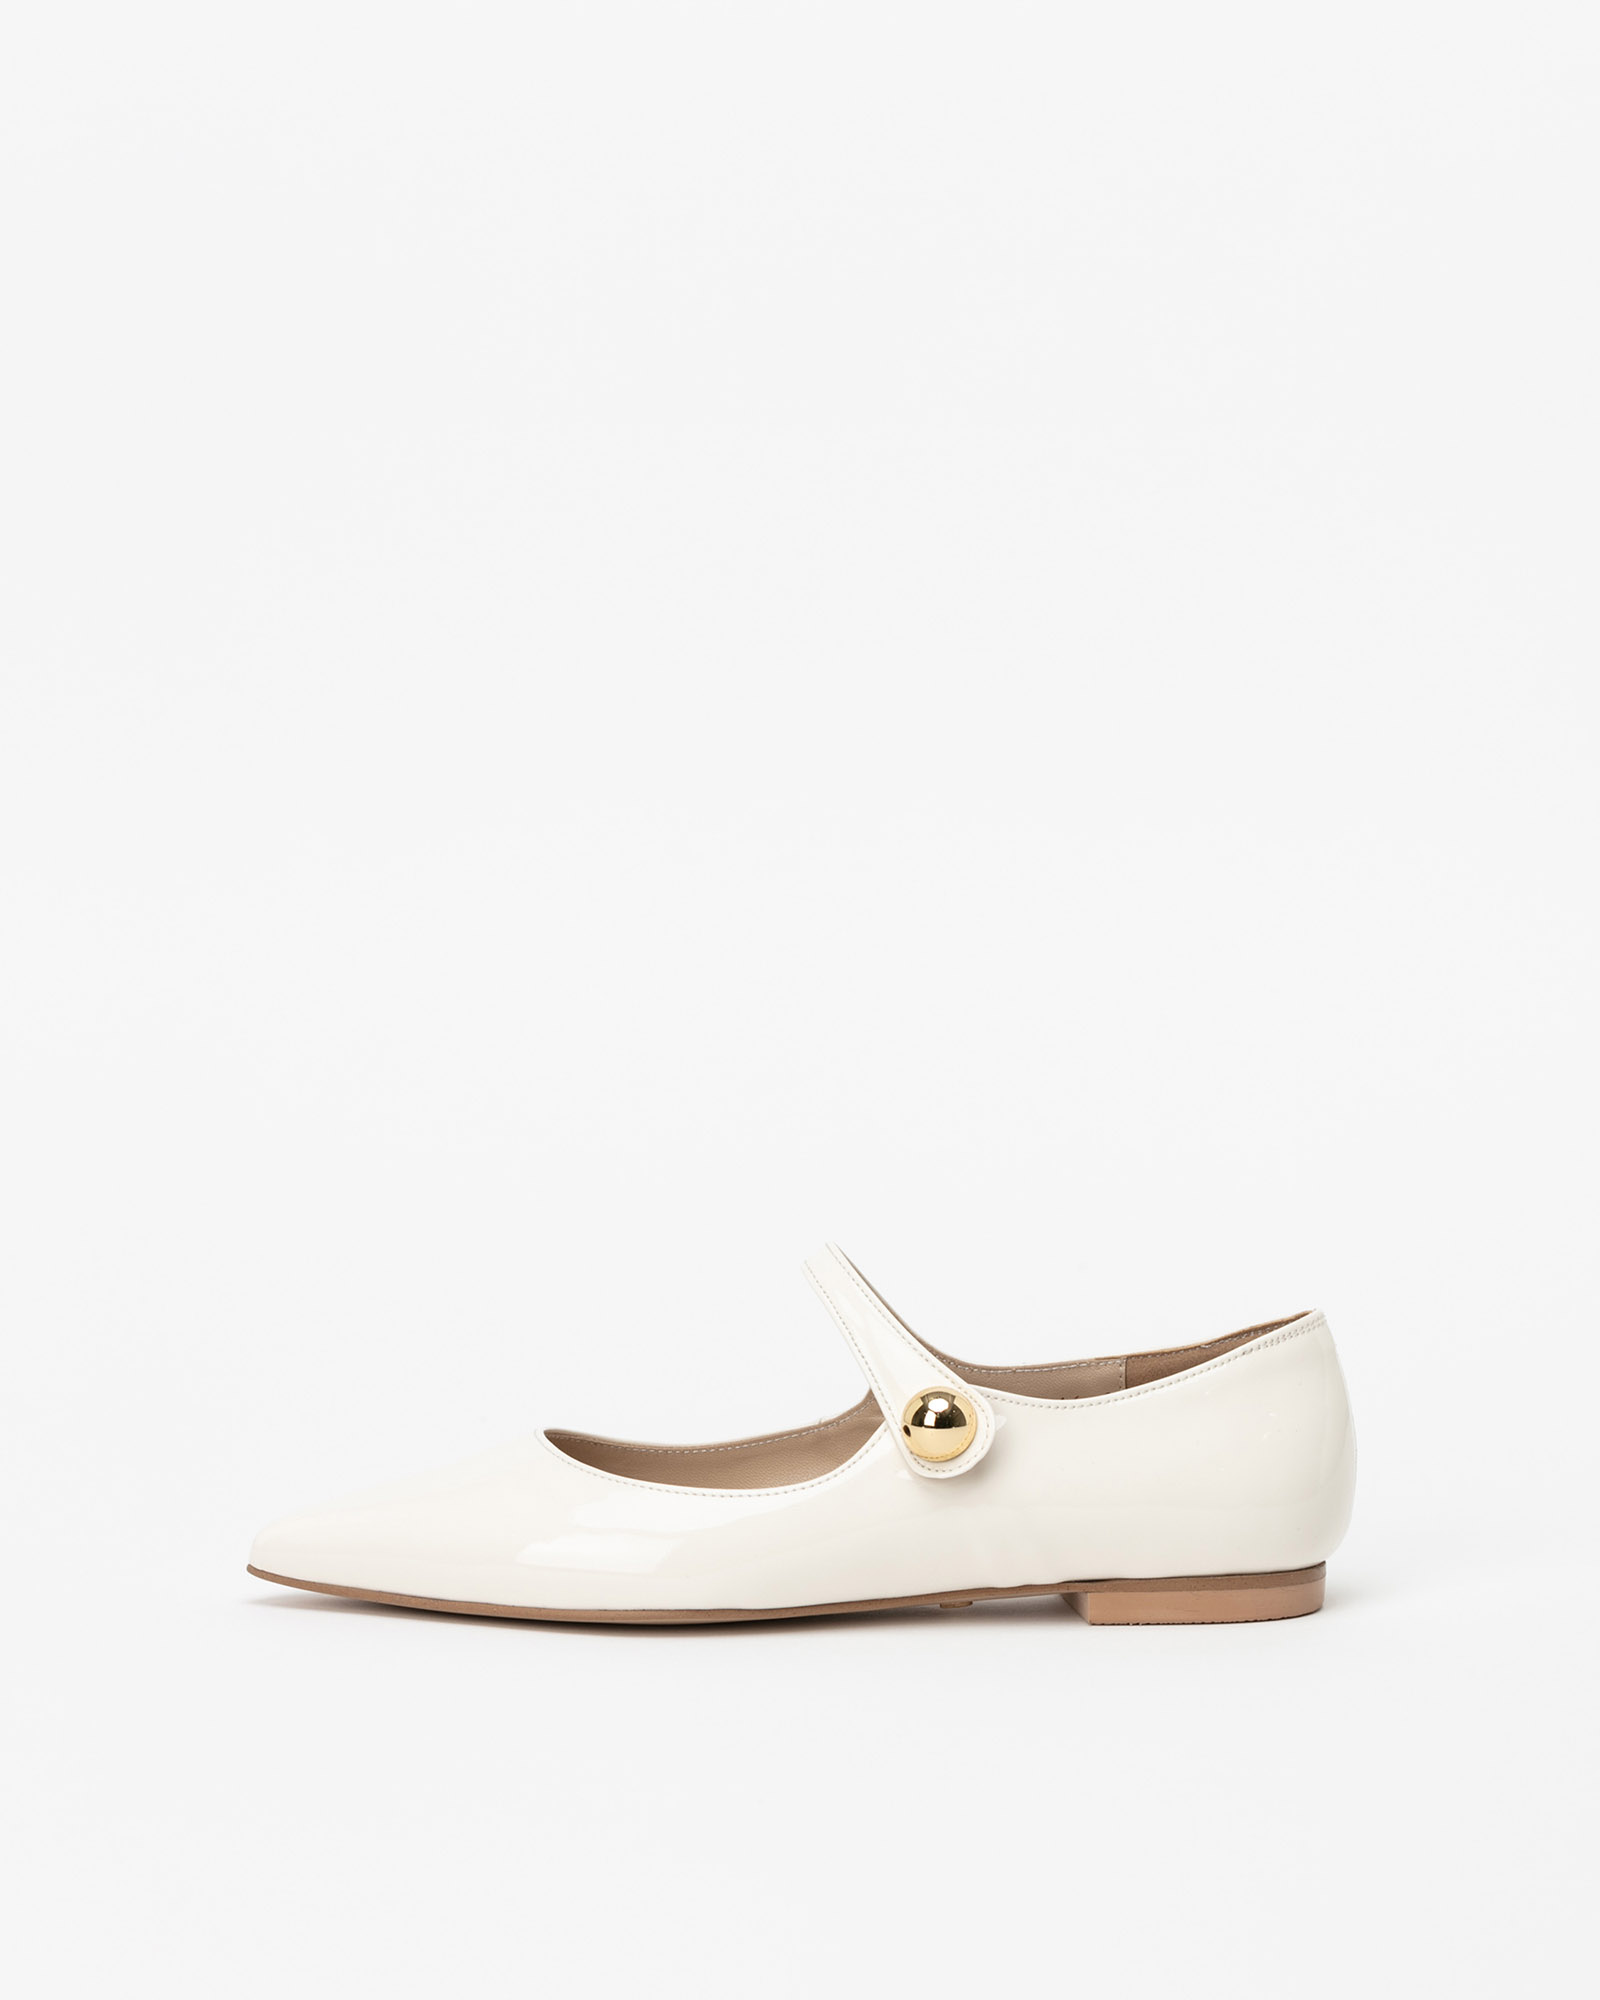 Loire Maryjane Flat Shoes in Milky White Patent